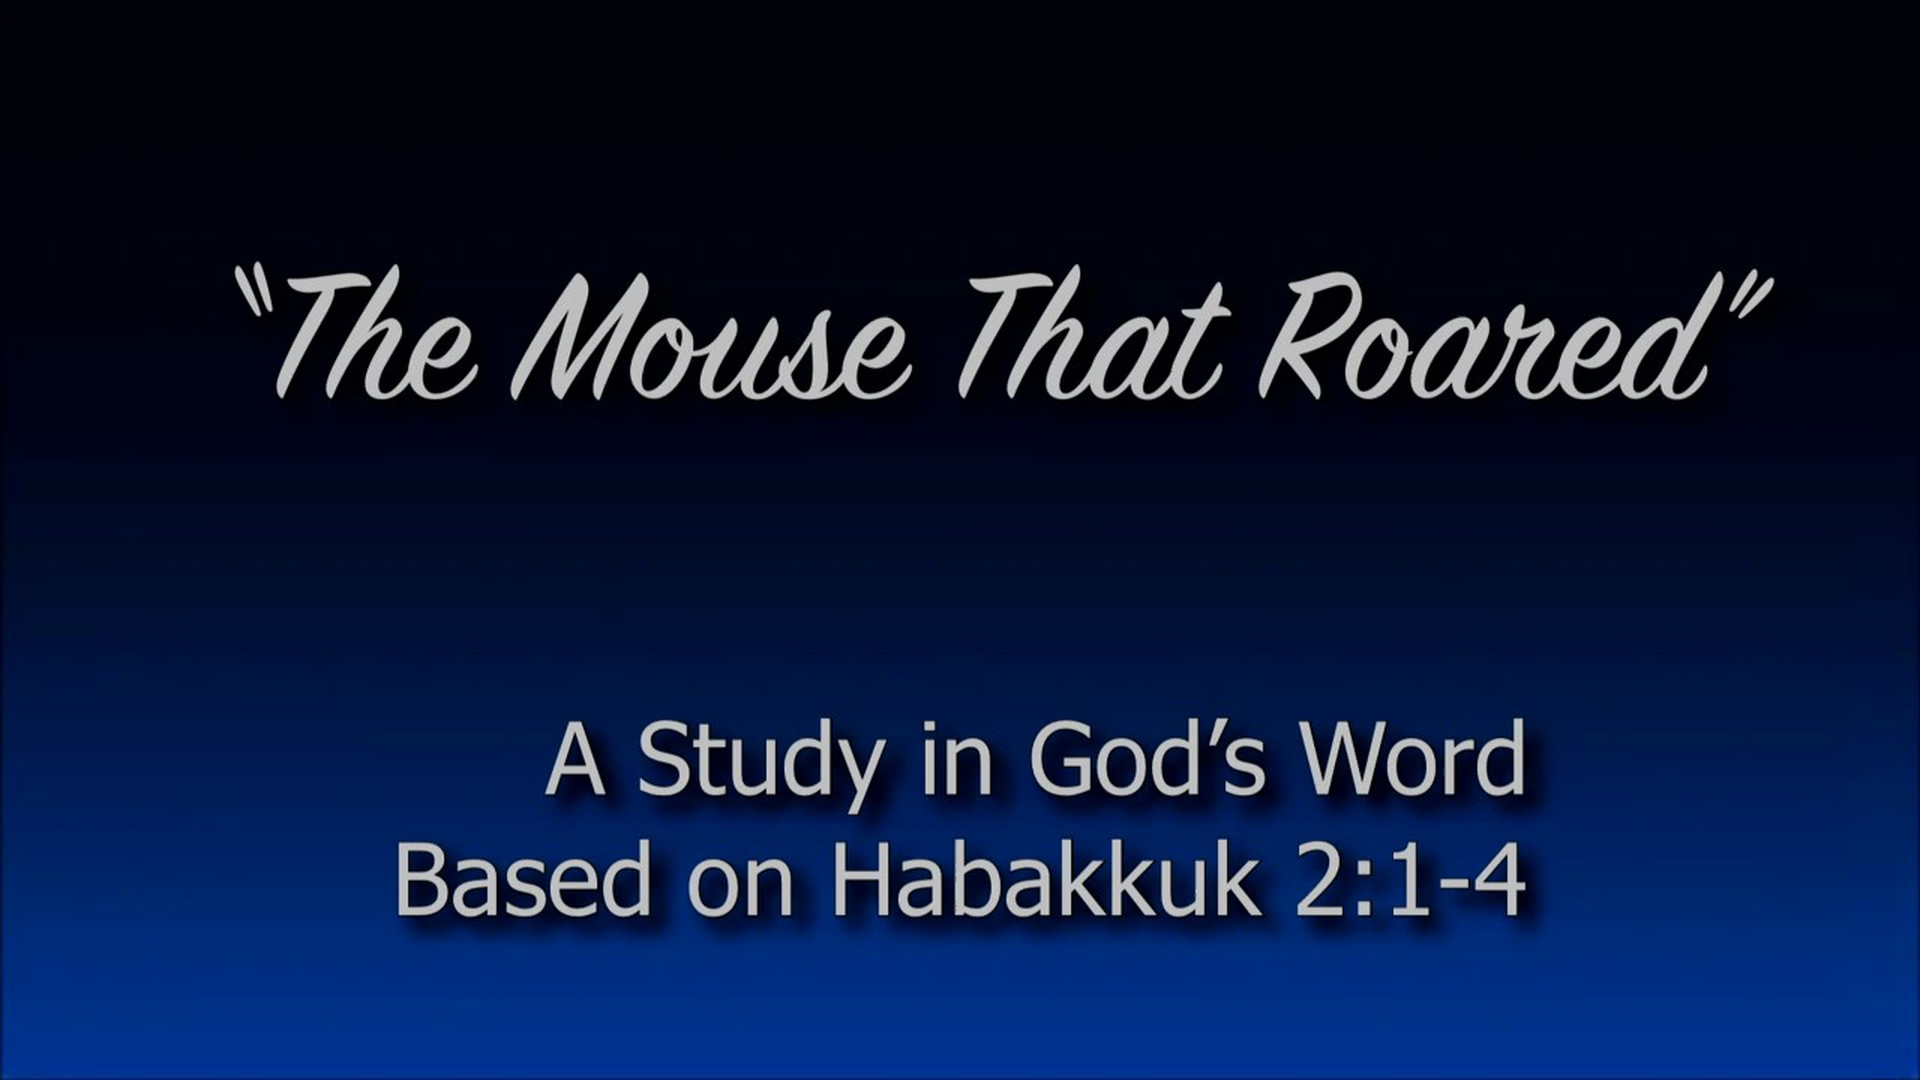 January 29, 2023 AM / The Mouse That Roared! / Pastor Bill Bjork